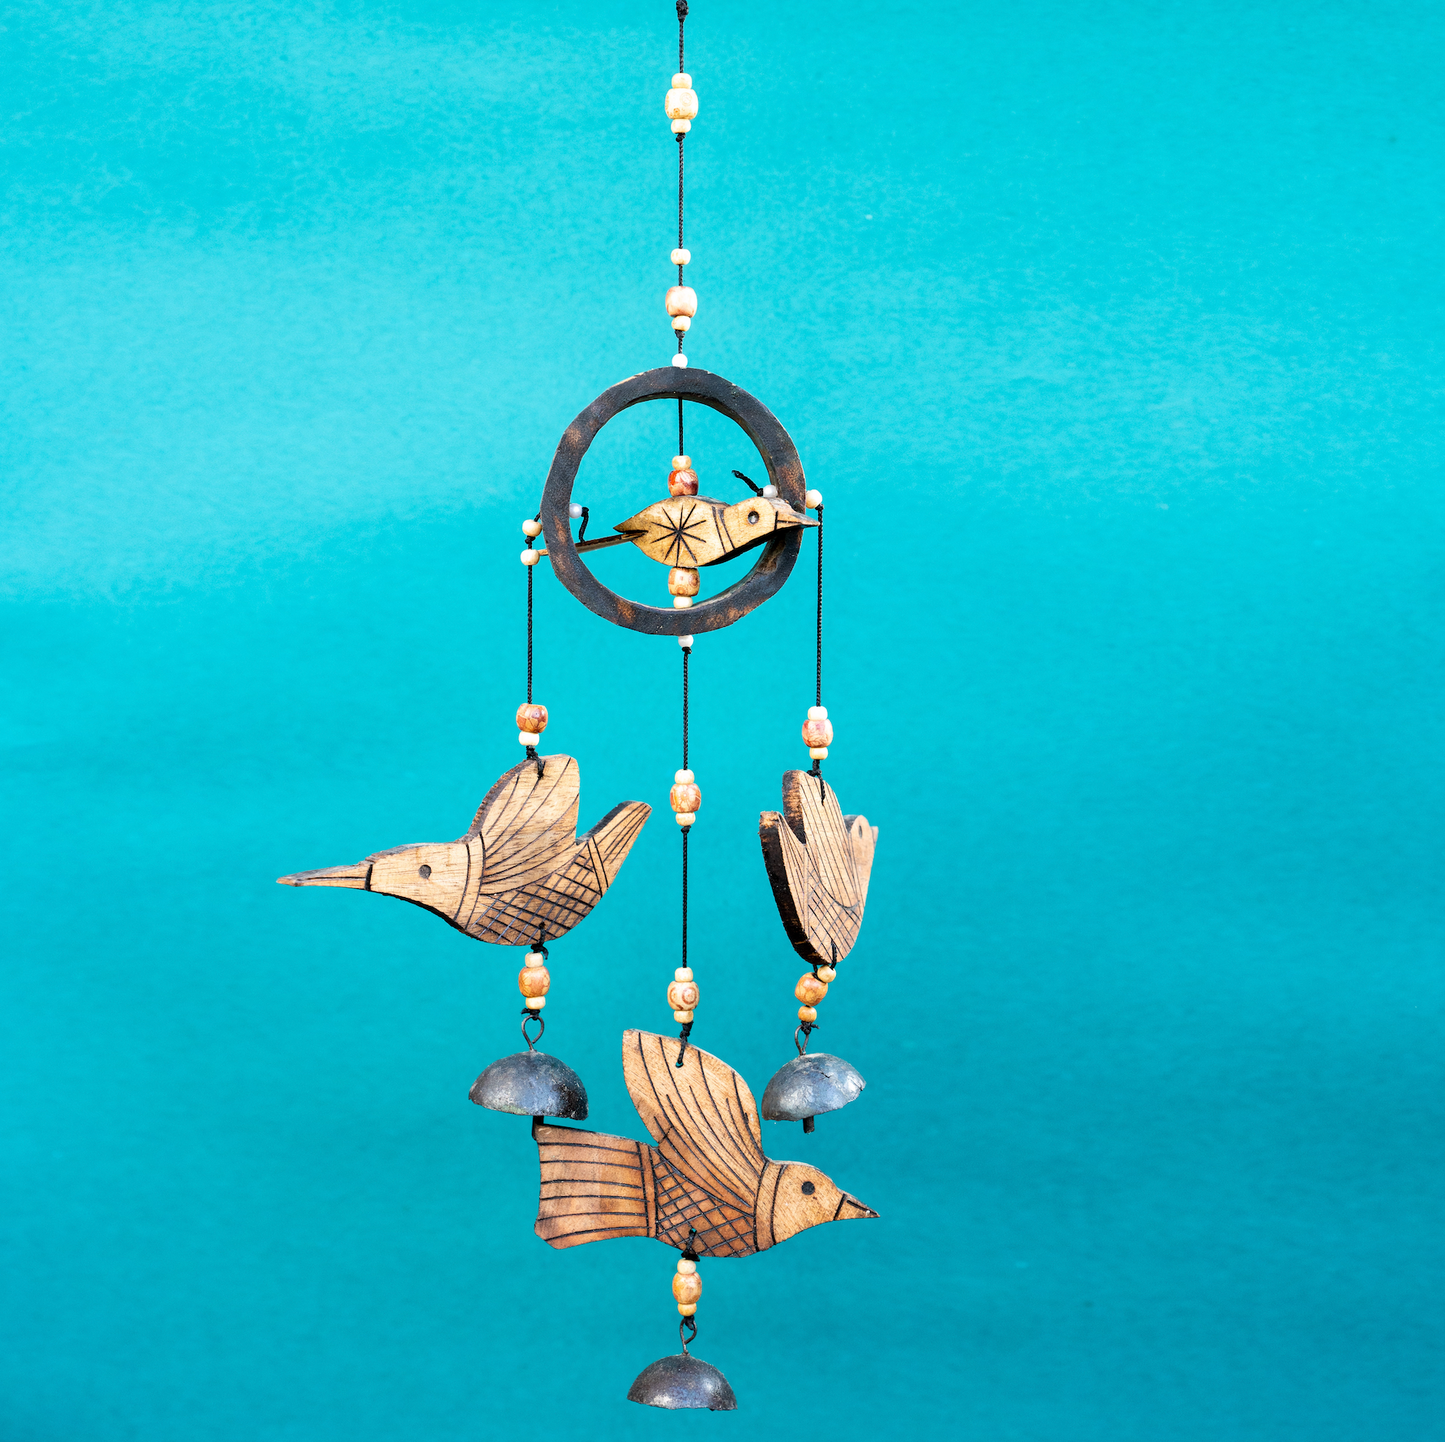 Wind Chime 3 Bell - Hanging Bird